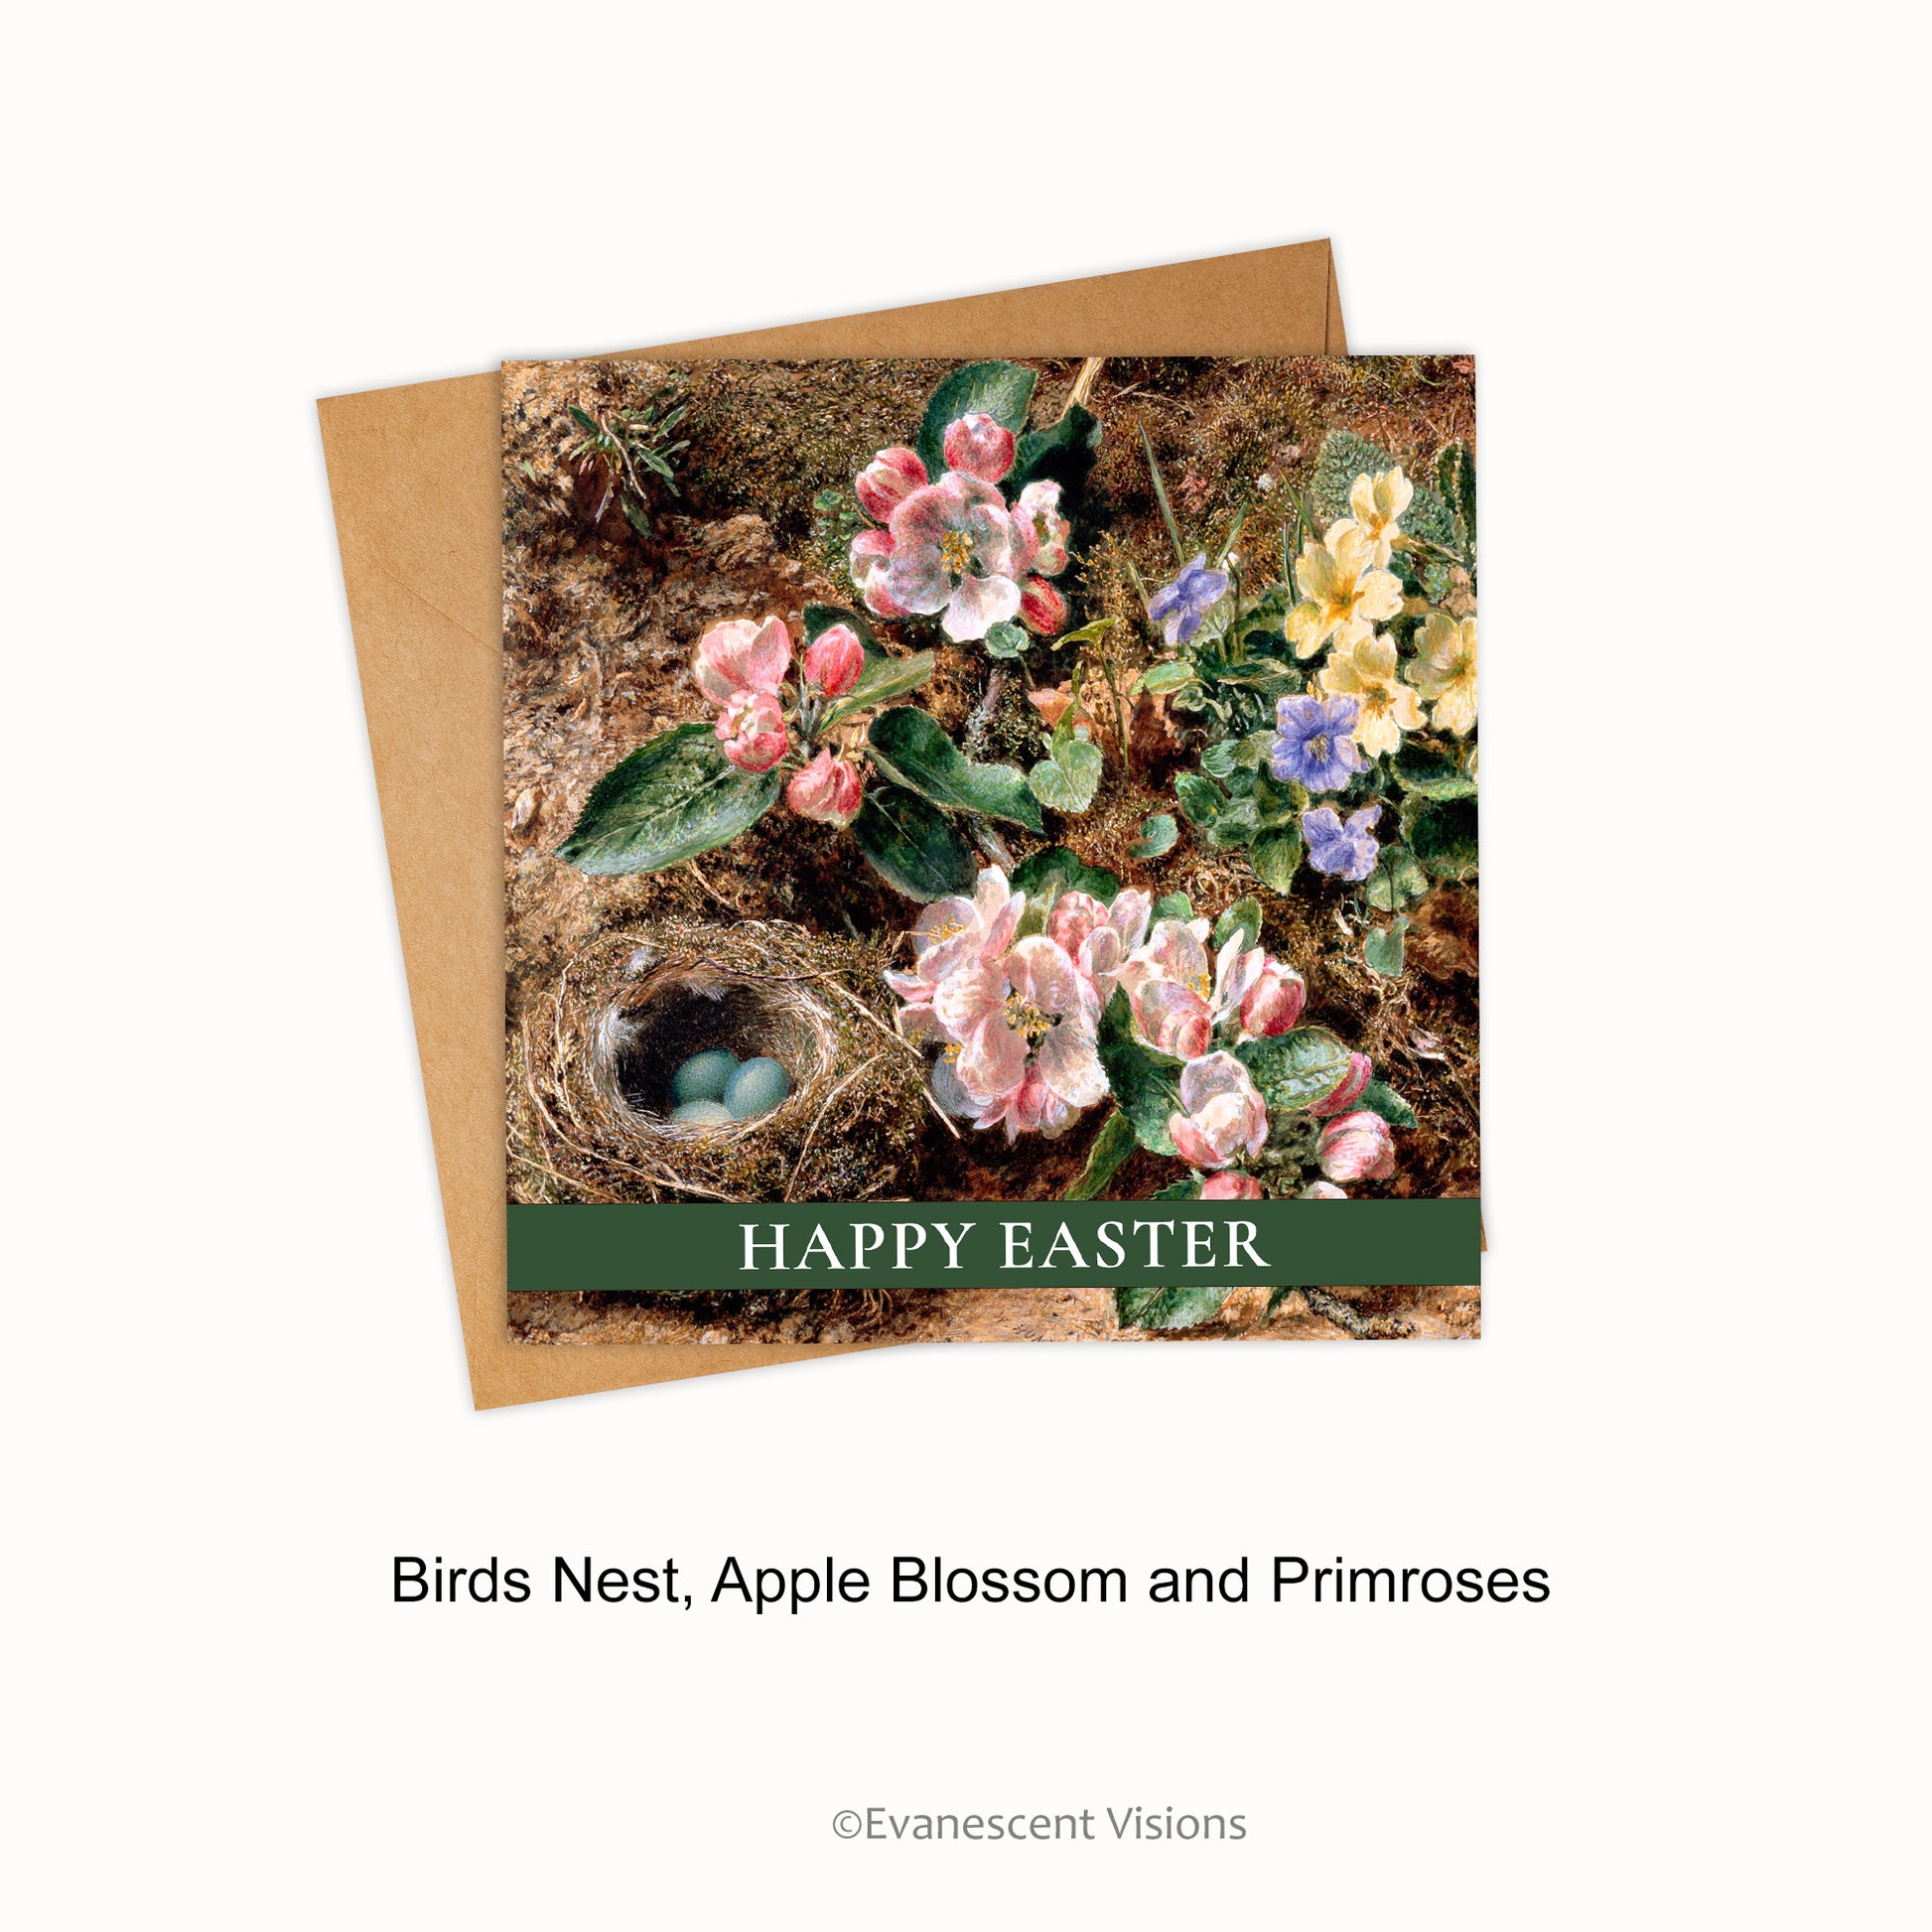 Card and envelope with design choice 'Birds Nest, Apple Blossom and Primroses